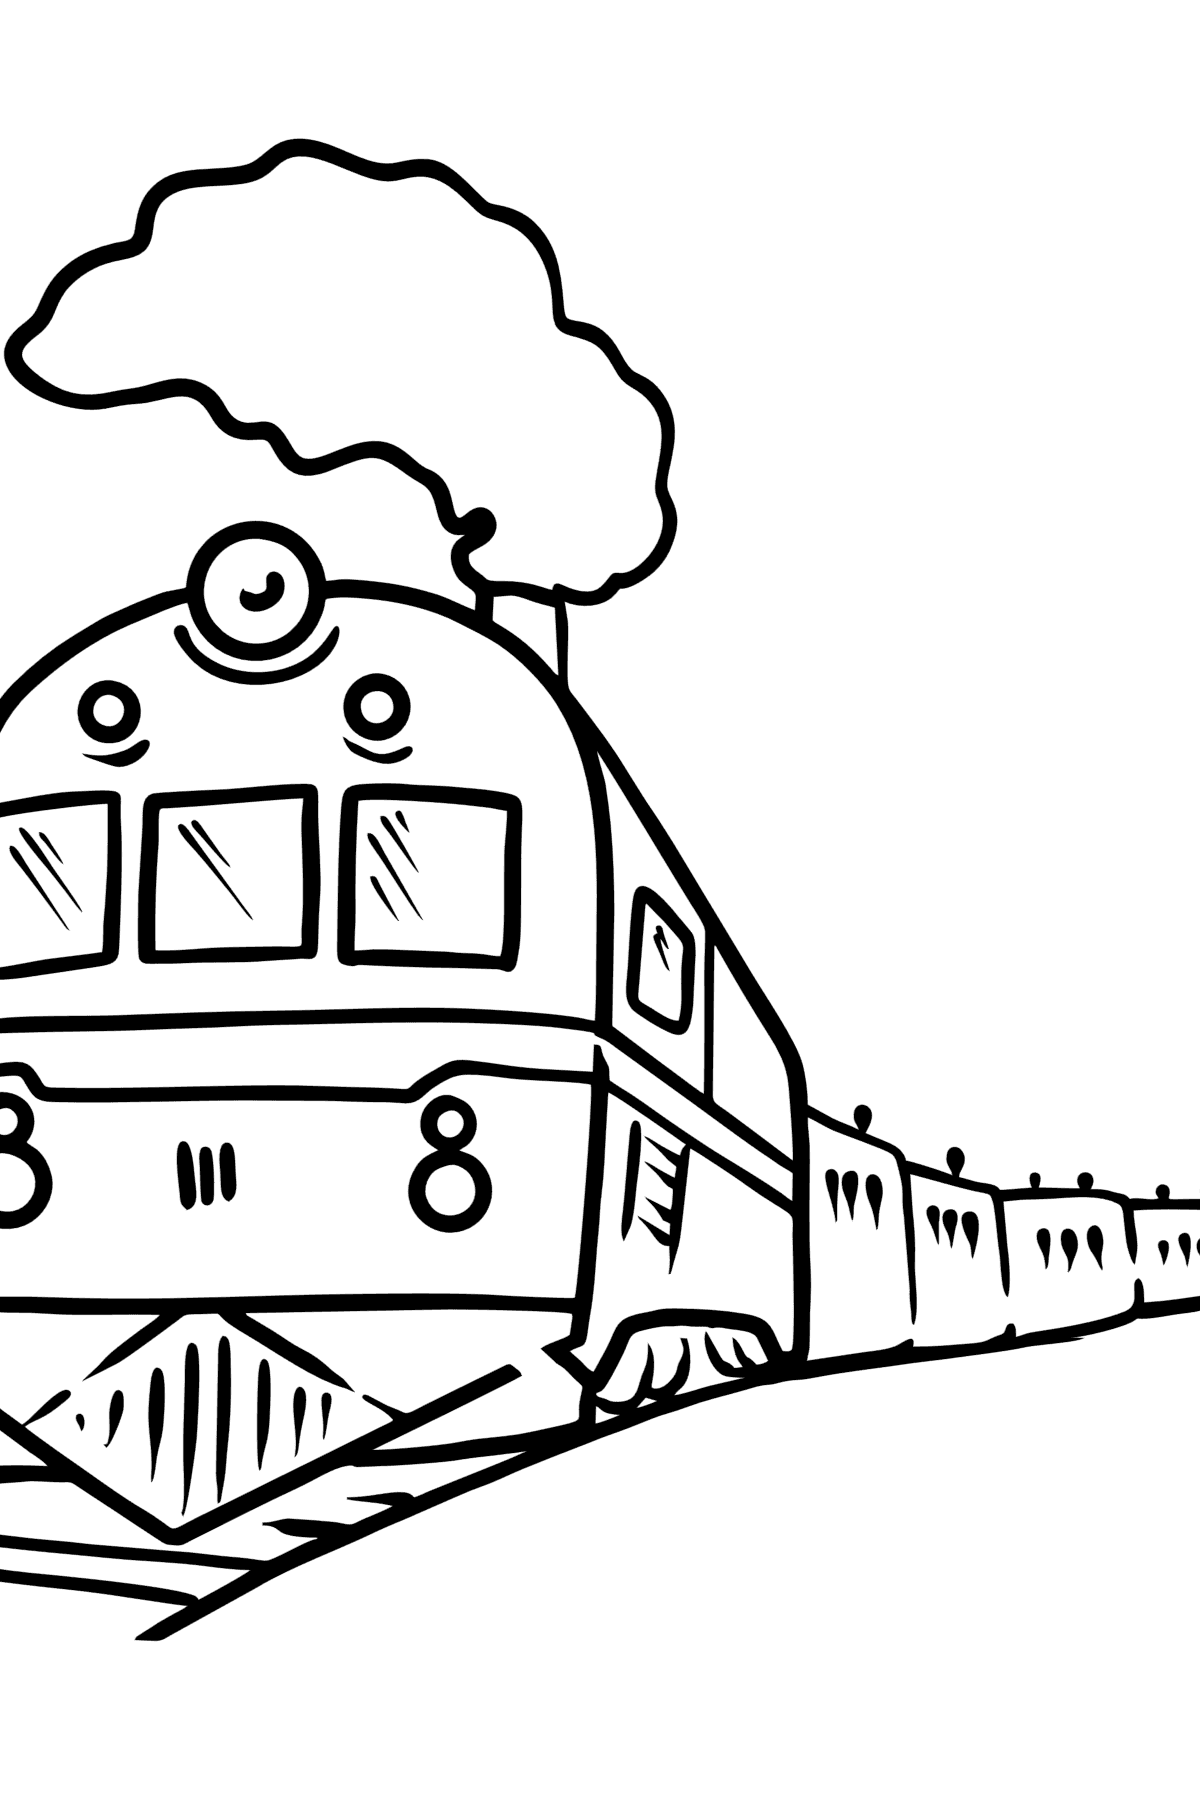 Train coloring page for toddlers - Coloring Pages for Kids